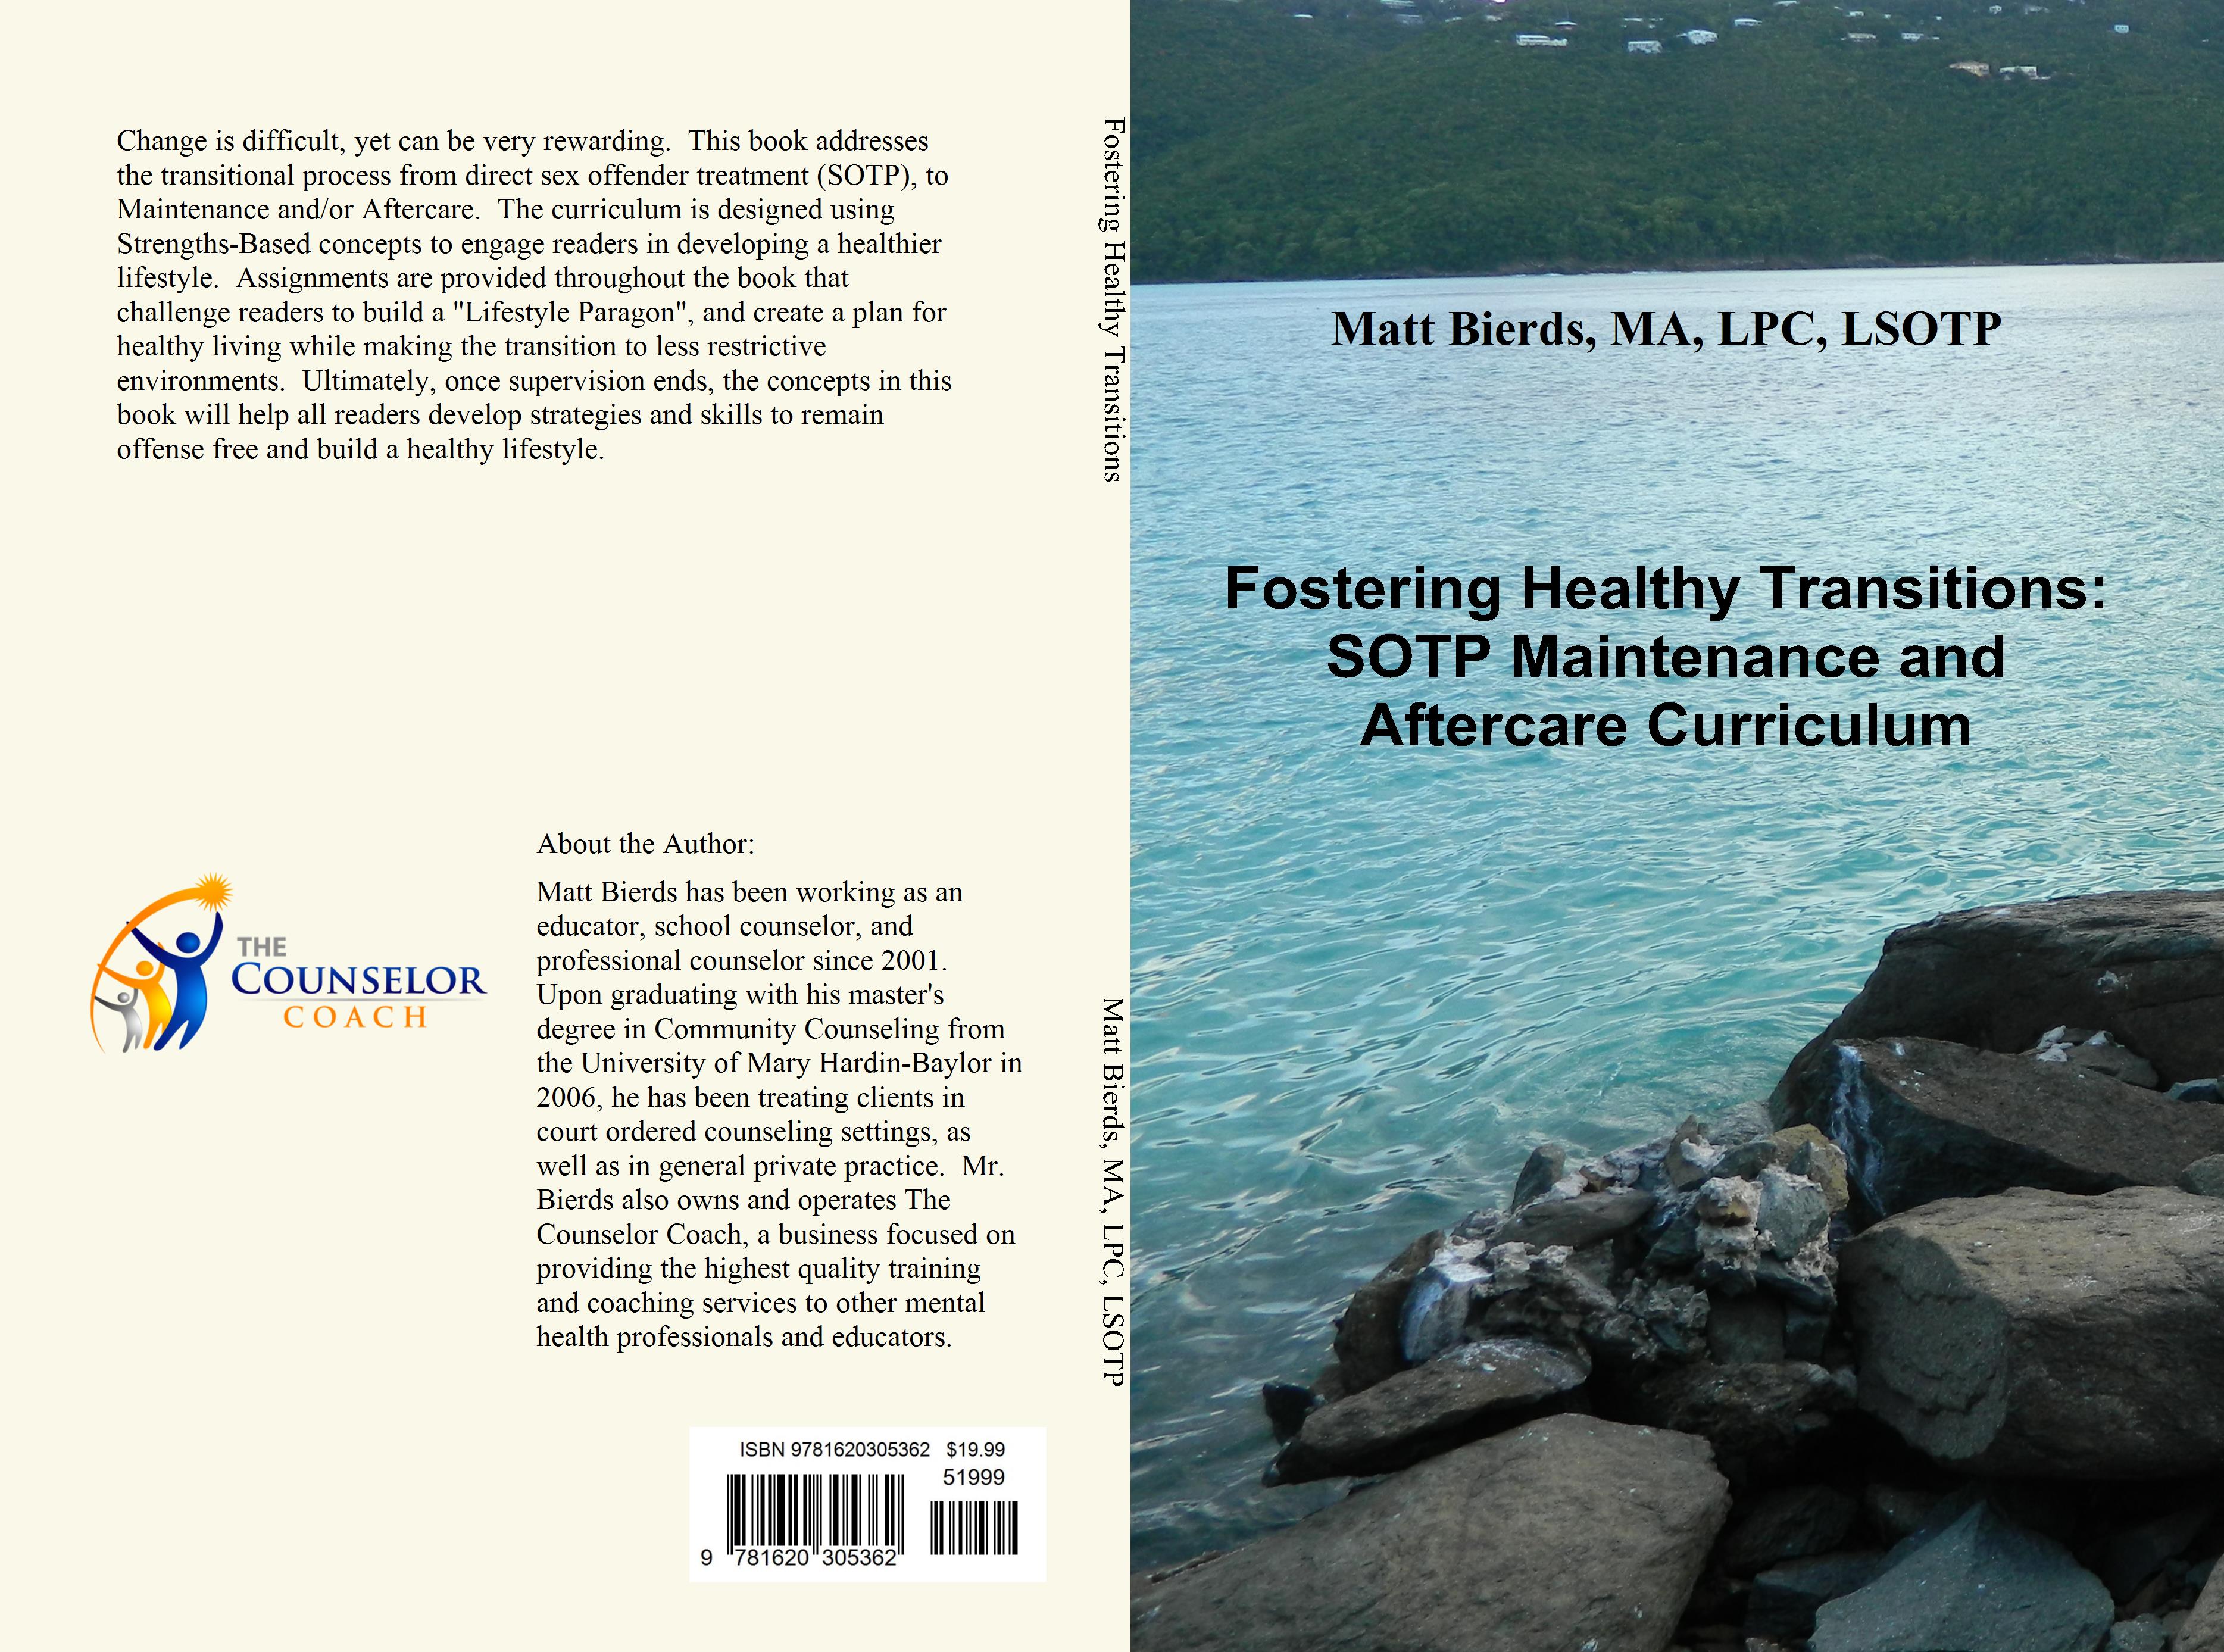 Fostering Healthy Transitions: SOTP Maintenance and Aftercare Curriculum cover image